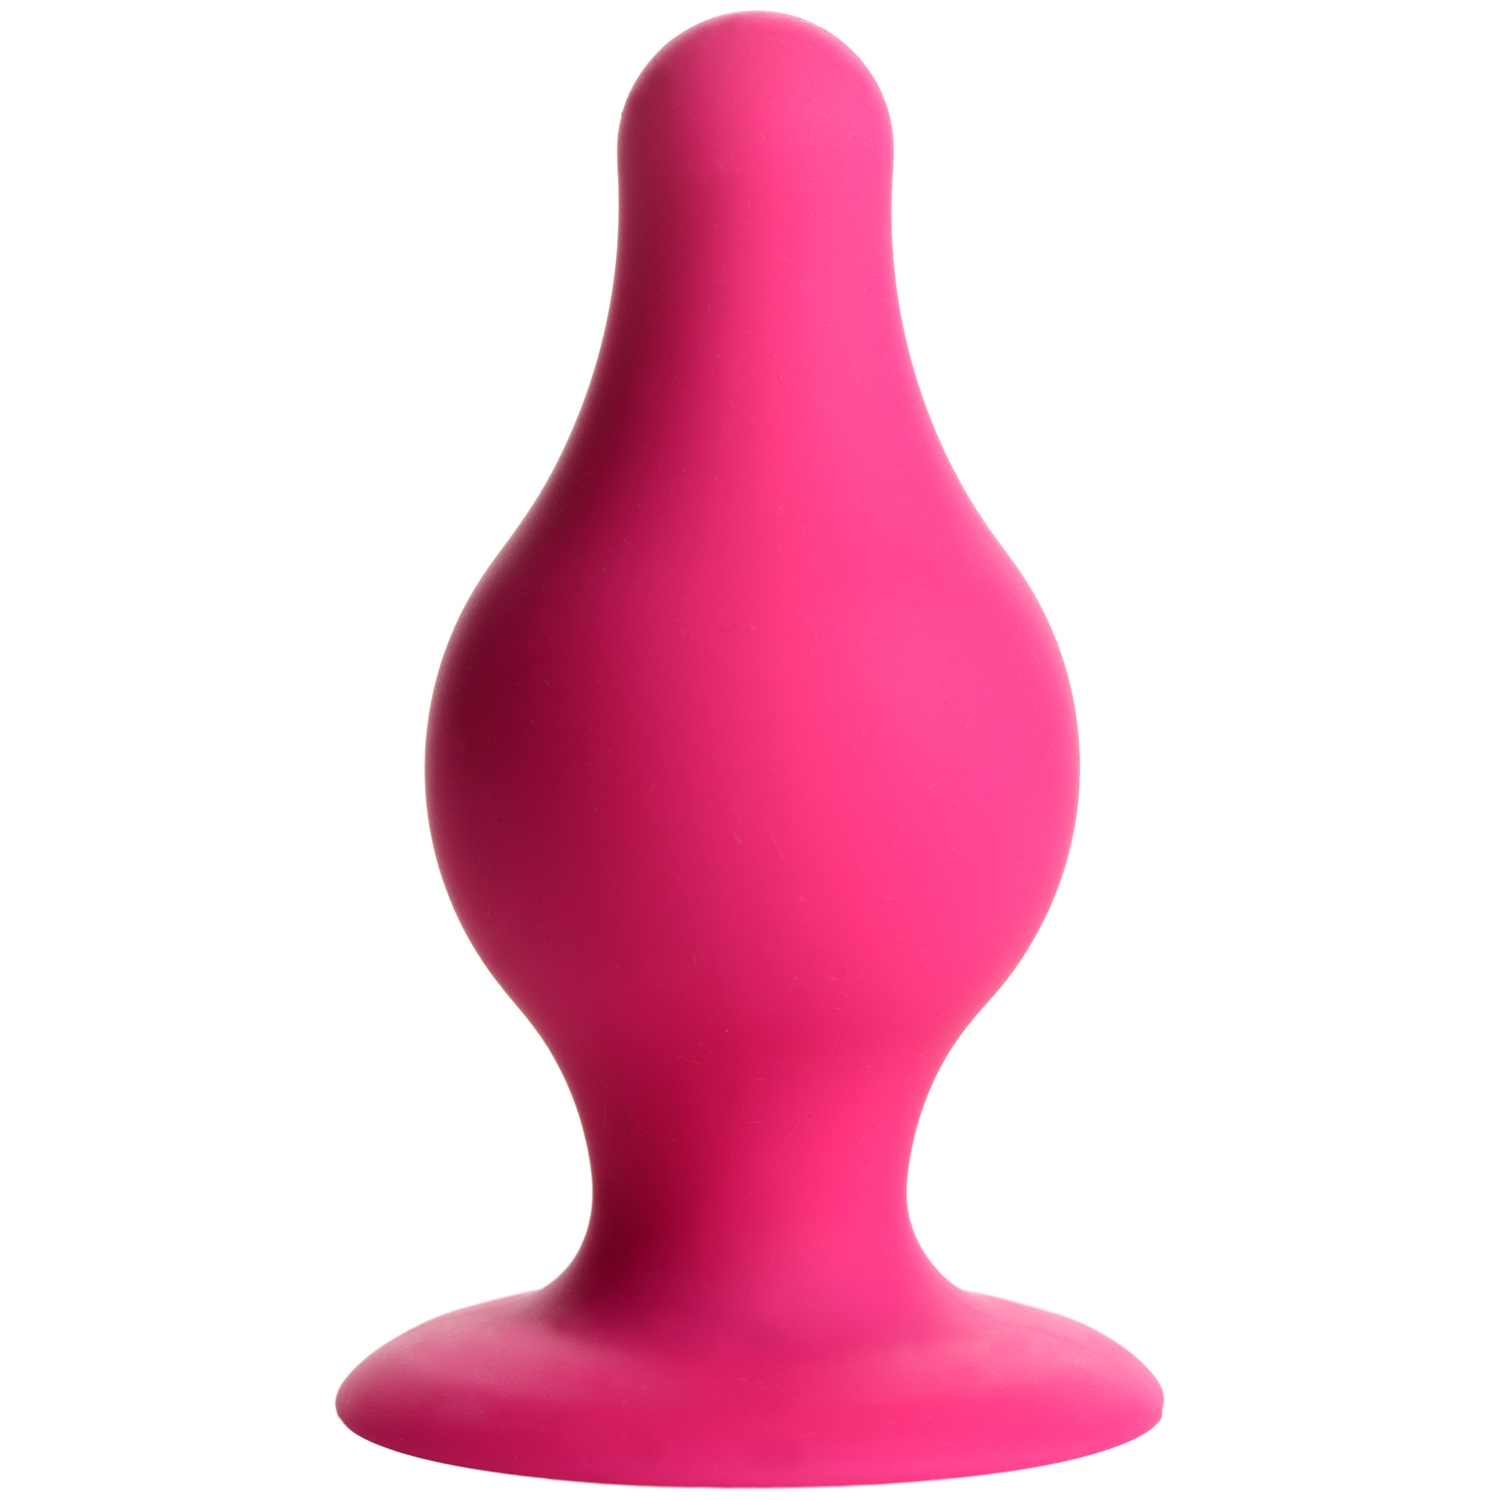 Squeeze-It Squeezable Butt Plug Small - Pink